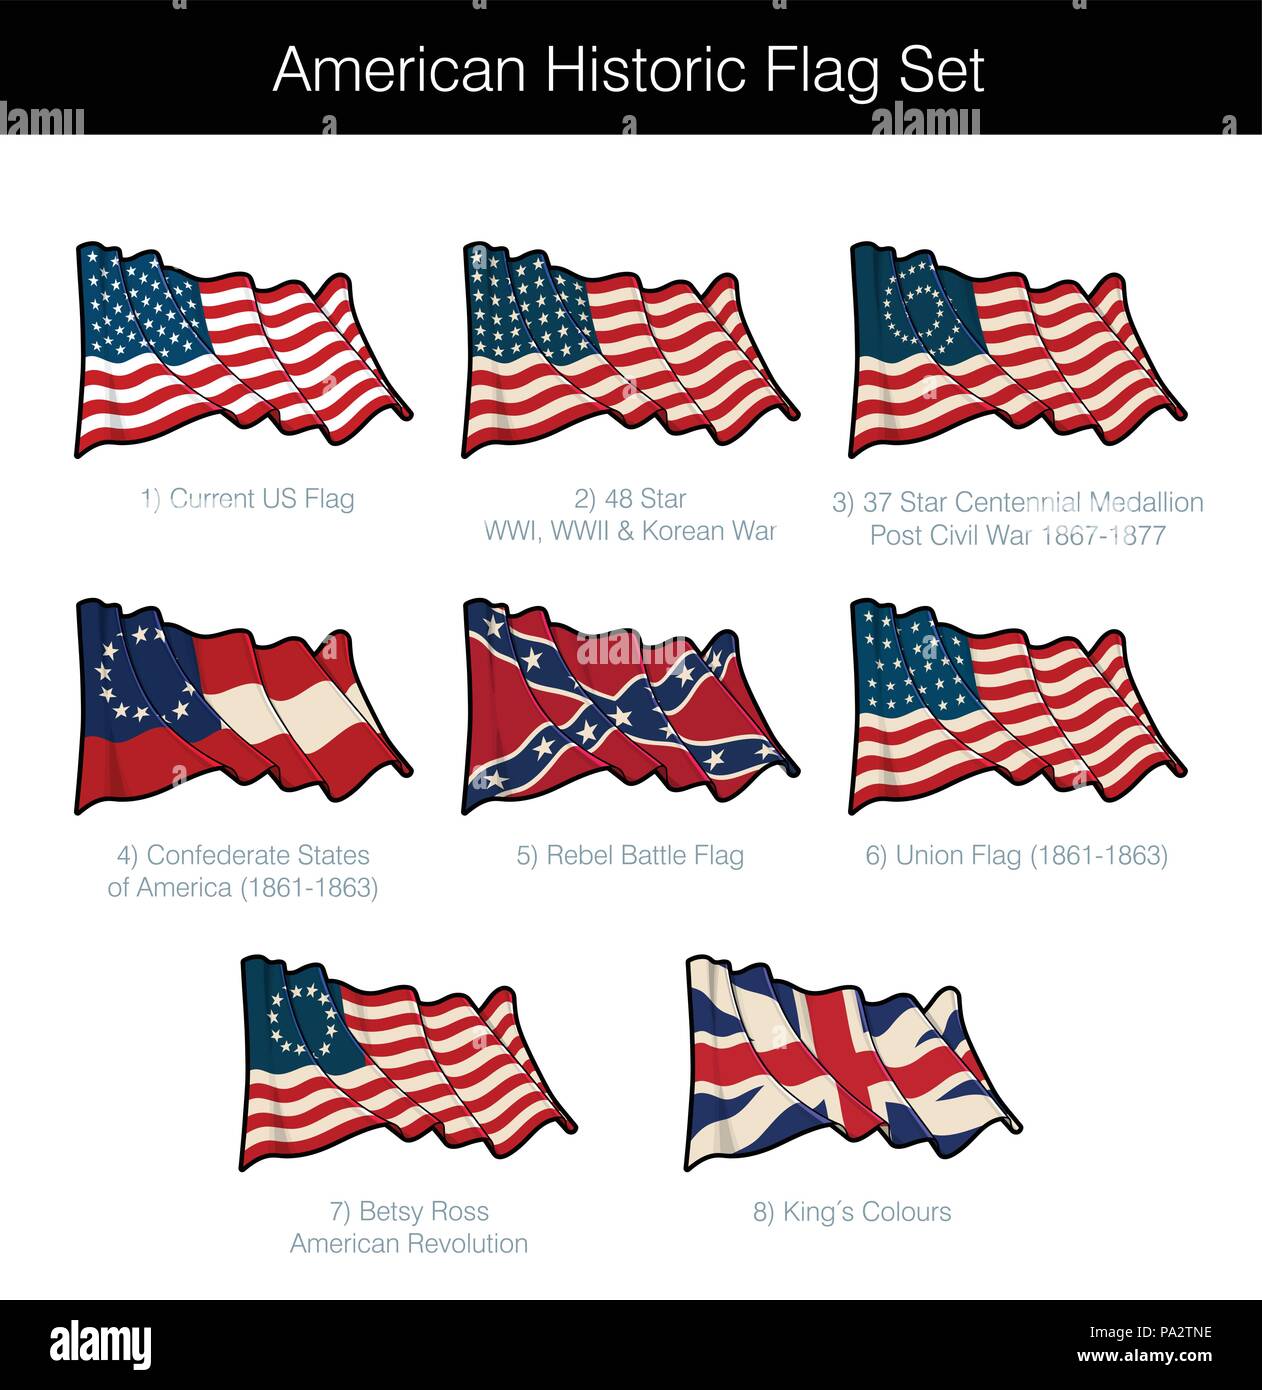 American Revolutionary War flag. Old American flag. The 13 stars and stripes.  Land of the free and the home of the brave. Star-spangled. Stock  Illustration